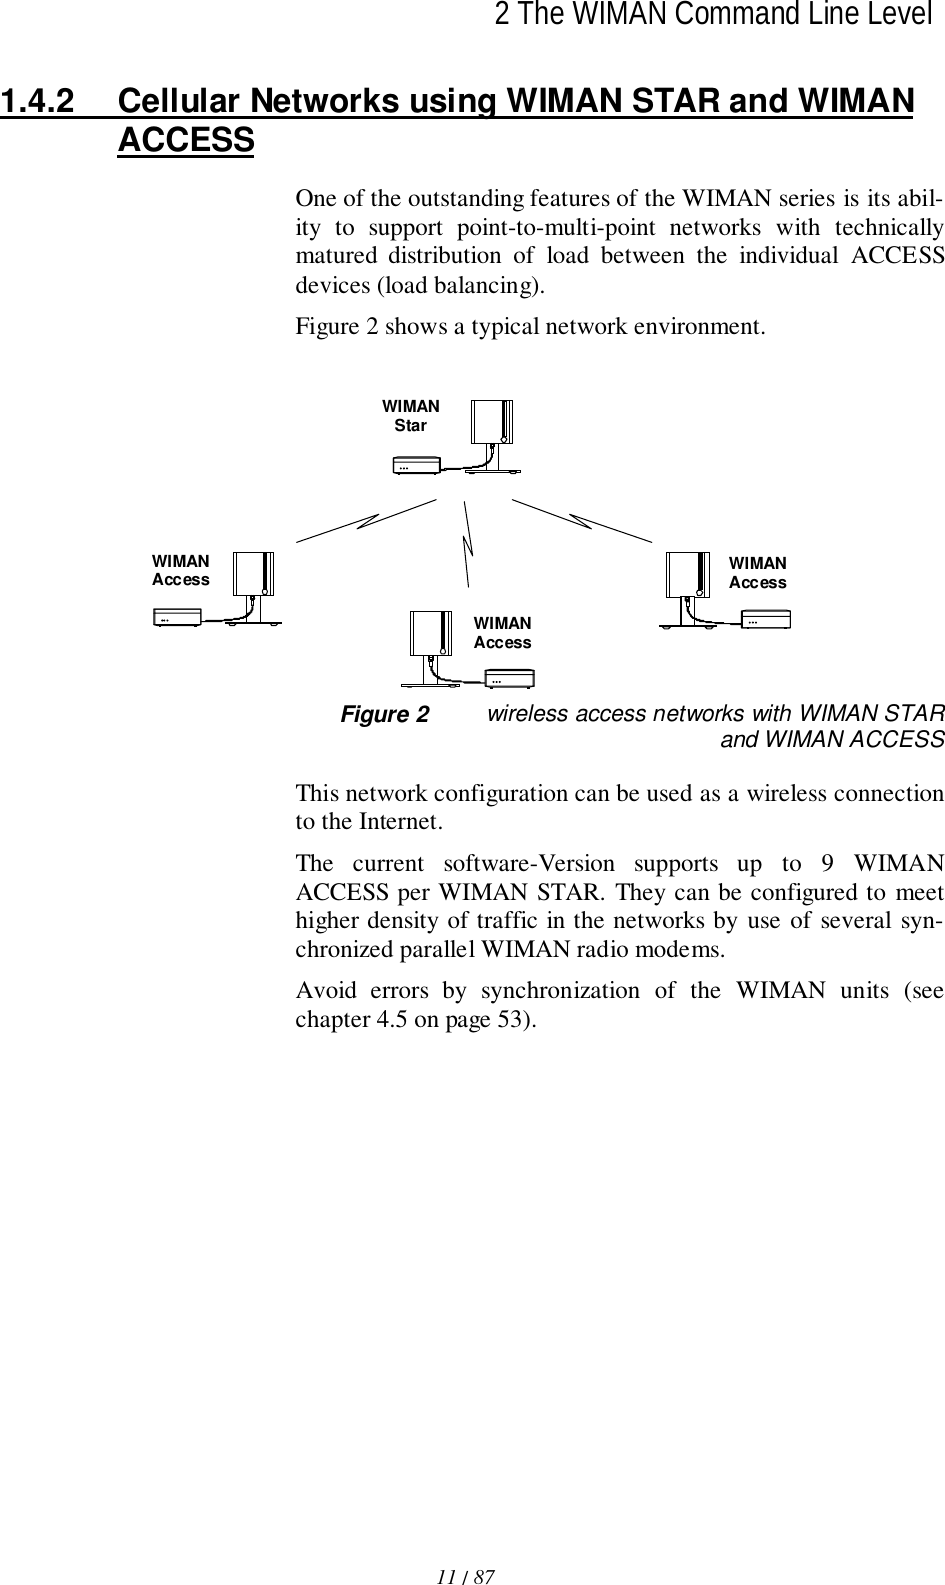 2 The WIMAN Command Line Level11 / 87l1.4.2  Cellular Networks using WIMAN STAR and WIMANACCESSOne of the outstanding features of the WIMAN series is its abil-ity to support point-to-multi-point networks with technicallymatured distribution of load between the individual ACCESSdevices (load balancing).Figure 2 shows a typical network environment. WIMANAccessWIMANStarWIMANAccessWIMANAccess Figure 2 wireless access networks with WIMAN STARand WIMAN ACCESSThis network configuration can be used as a wireless connectionto the Internet.The current software-Version supports up to 9 WIMANACCESS per WIMAN STAR. They can be configured to meethigher density of traffic in the networks by use of several syn-chronized parallel WIMAN radio modems.Avoid errors by synchronization of the WIMAN units (seechapter 4.5 on page 53).